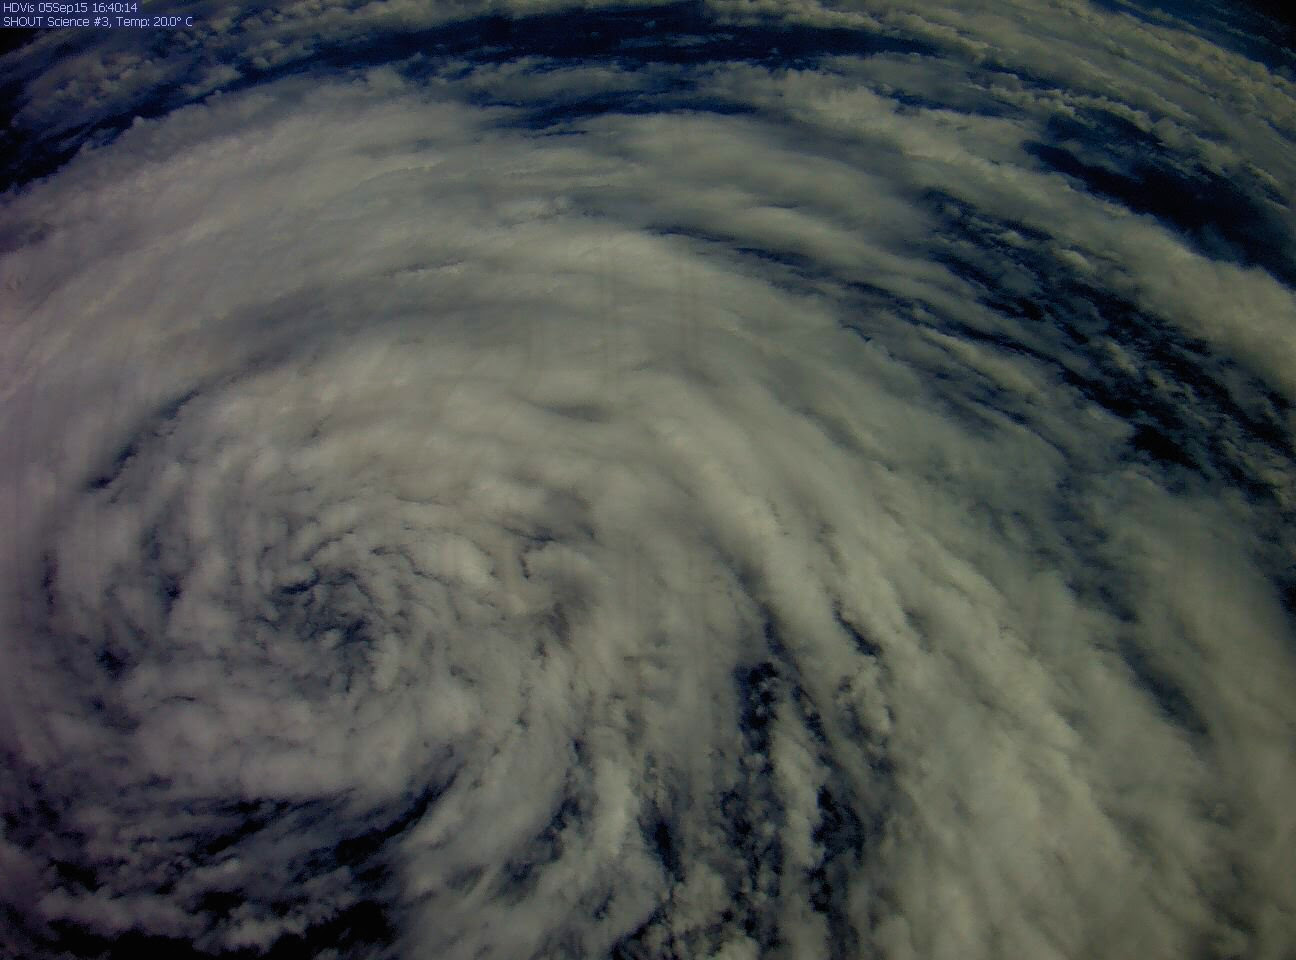 Image taken from NASA's Global Hawk during a NOAA mission to profile Tropical Storm Fred on September 5th, 2015. Image credit: NOAA